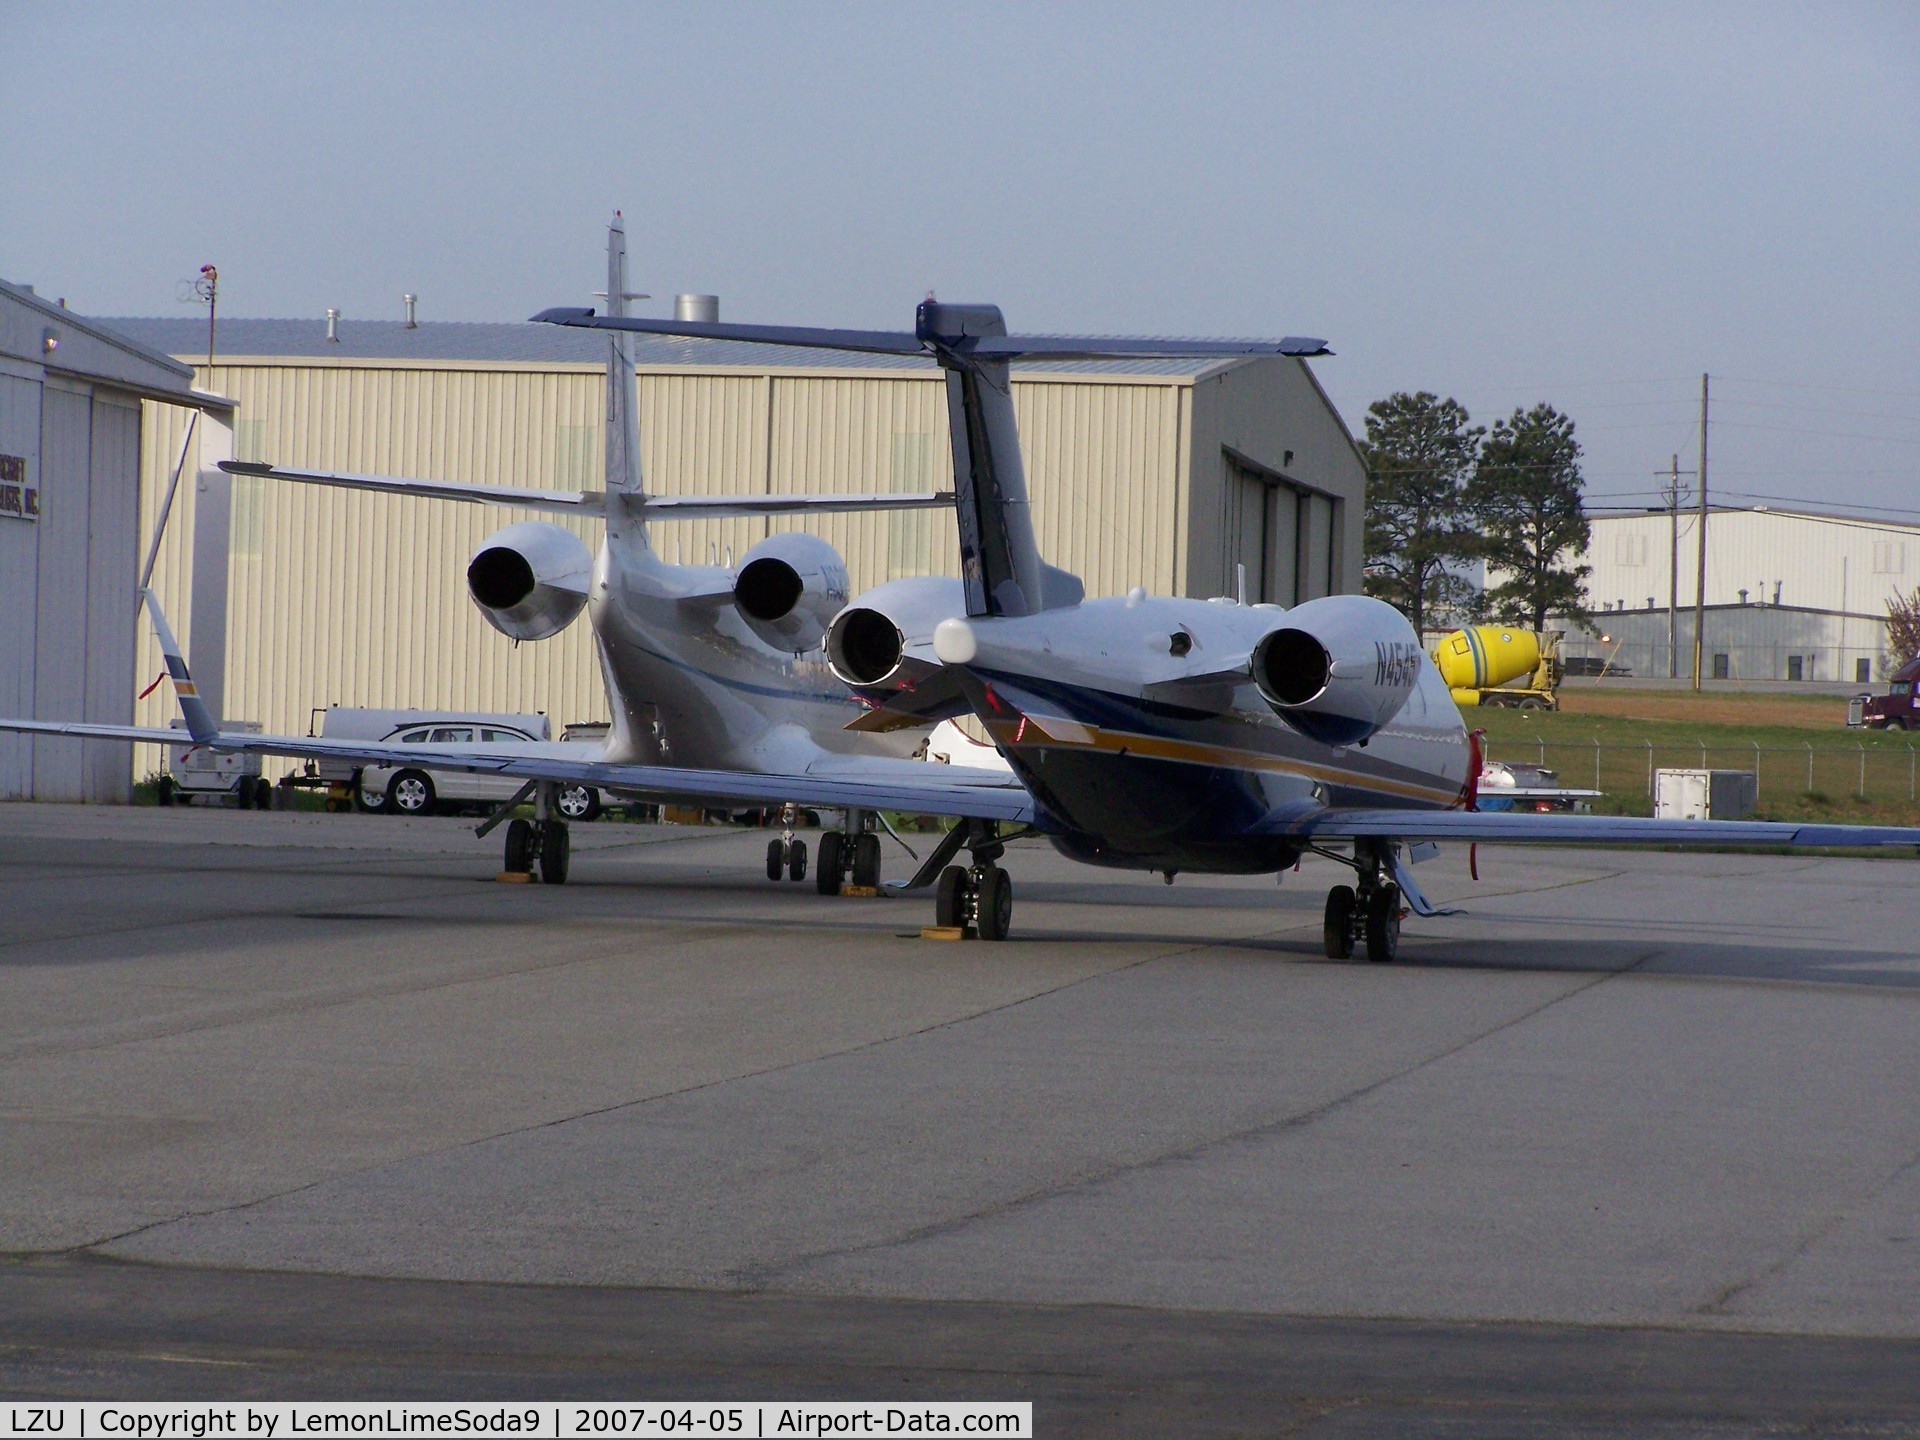 Gwinnett County - Briscoe Field Airport (LZU) - Two jets sitting net to each other.